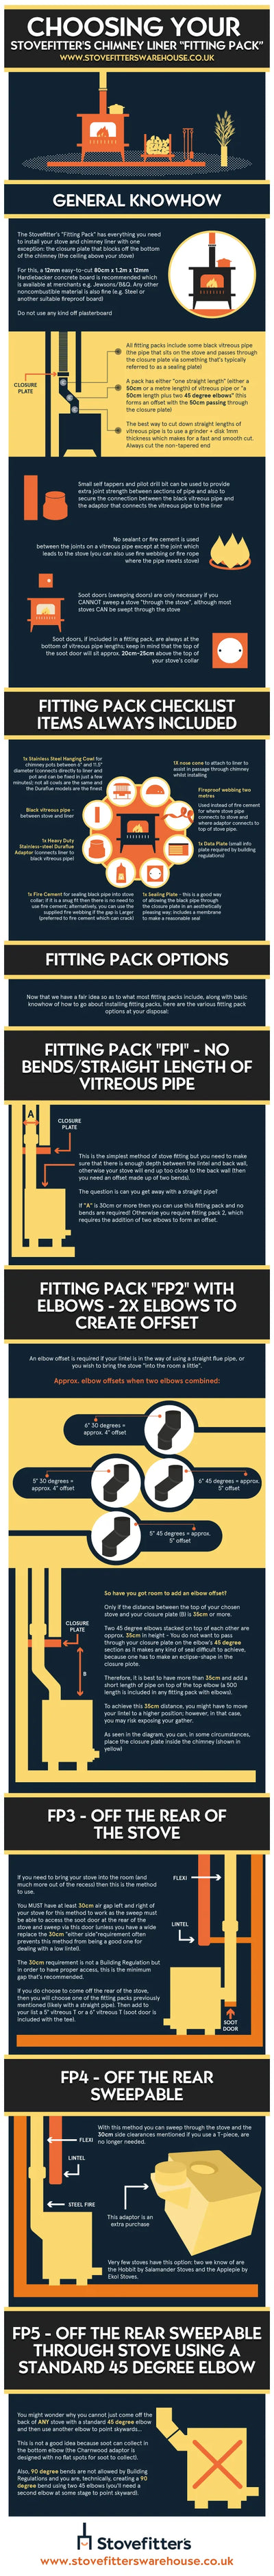 infographic showing how to fit a chimney liner to a wood stove